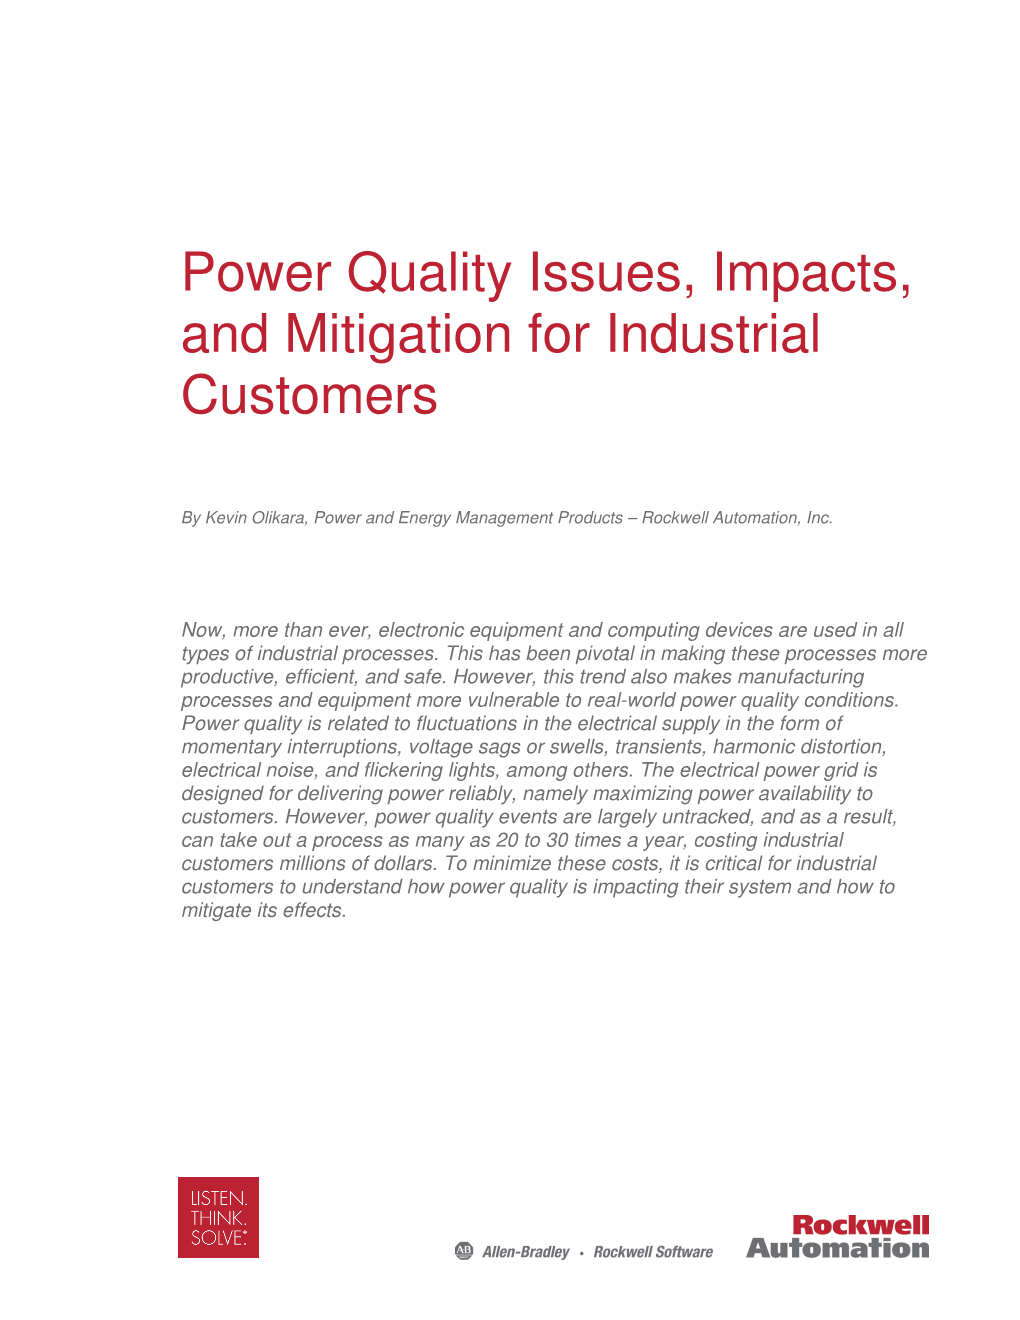 Power Quality Issues, Impacts, and Mitigation for Industrial Customers